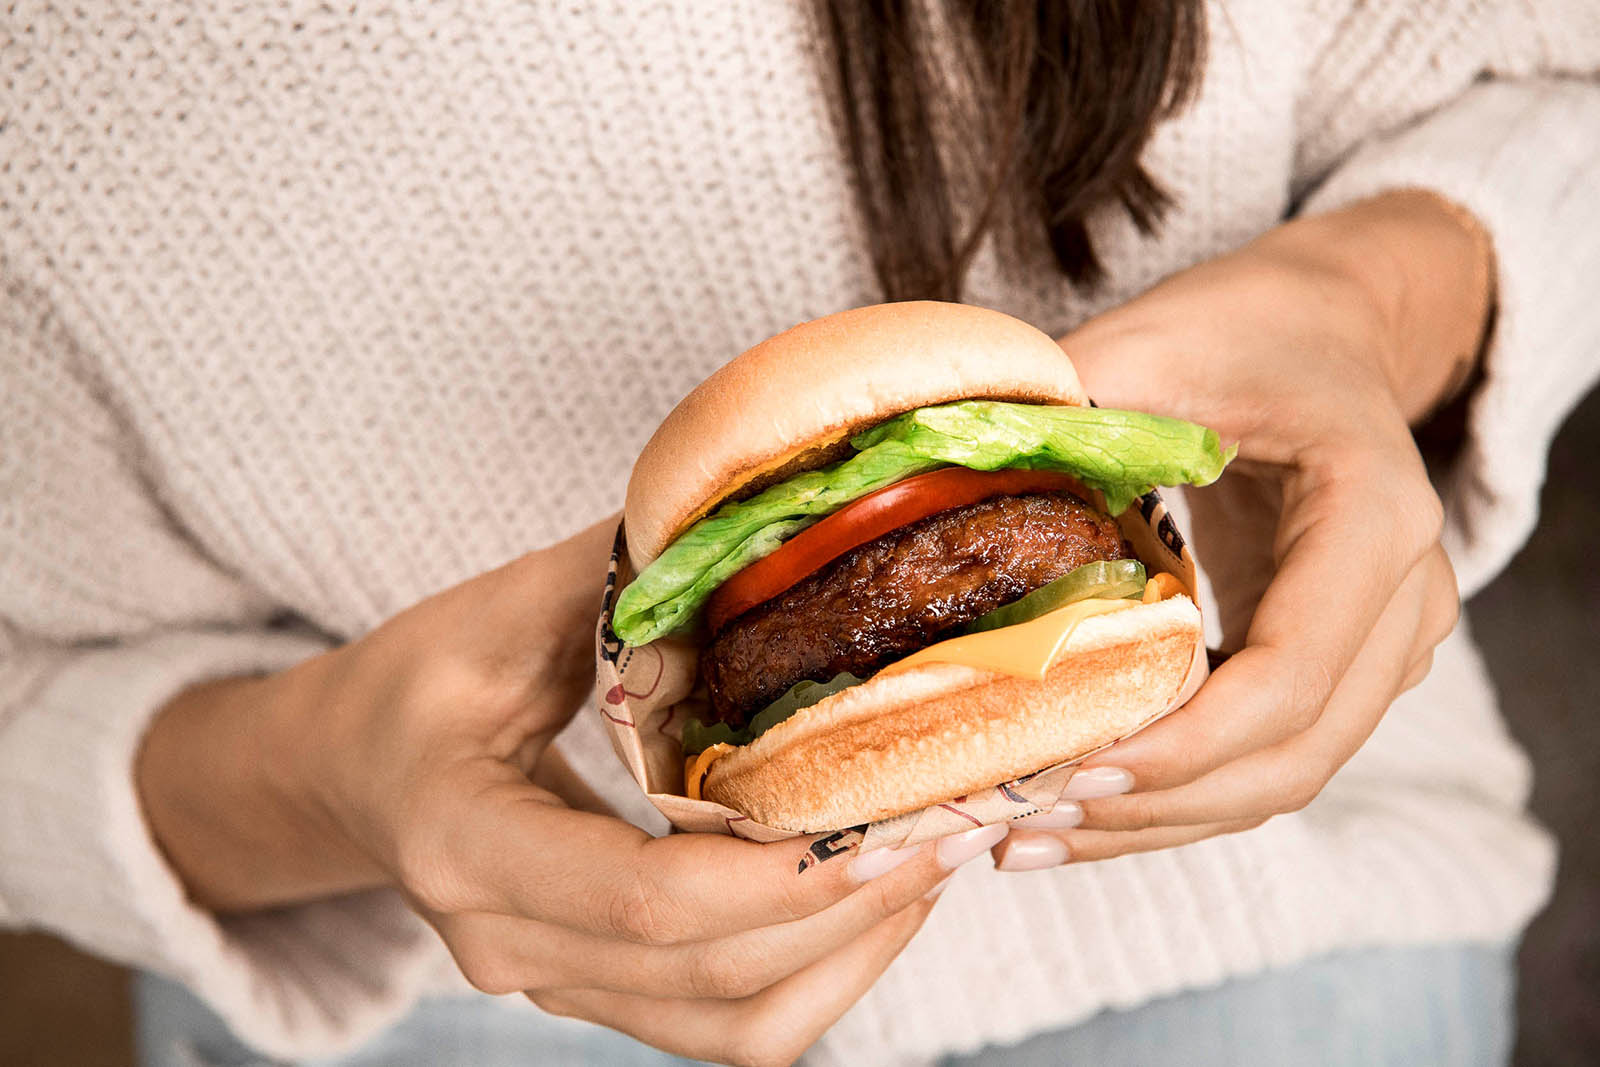 🥗 Wanna Know What People Love About You? Eat Nothing but Vegan Food for 24 Hours to Find Out Beyond Meat burger